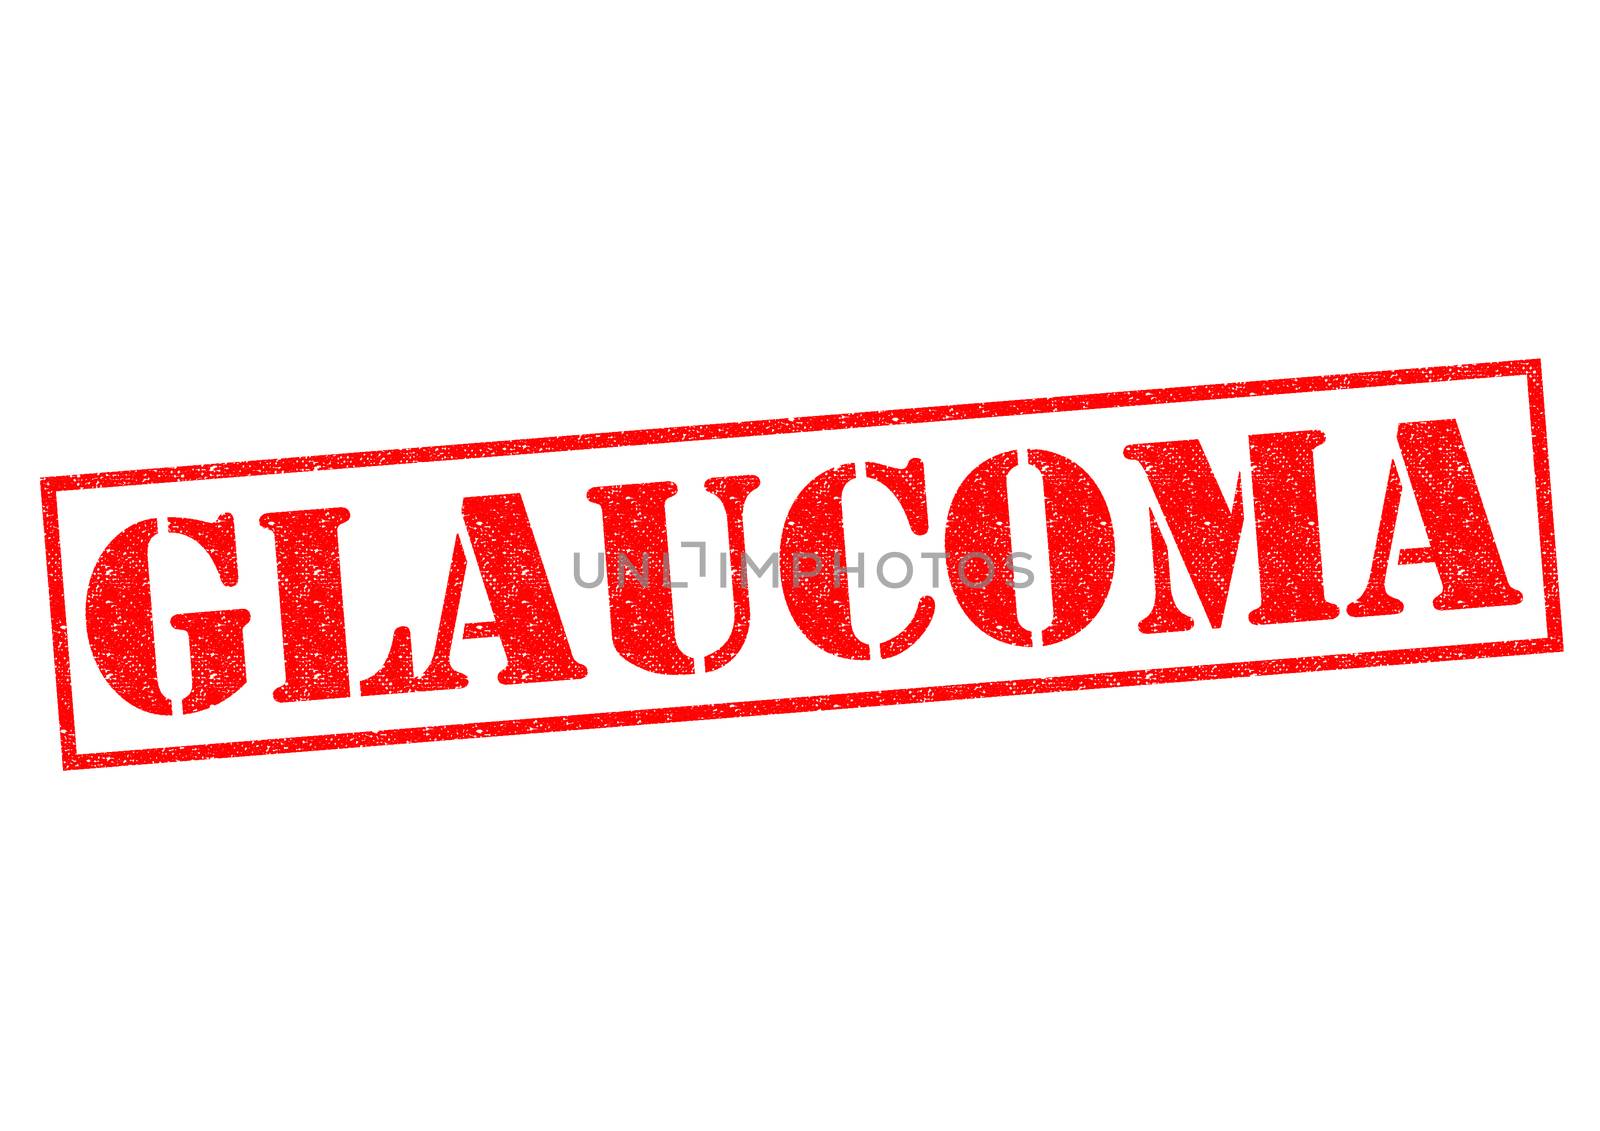 GLAUCOMA red Rubber Stamp over a white background.